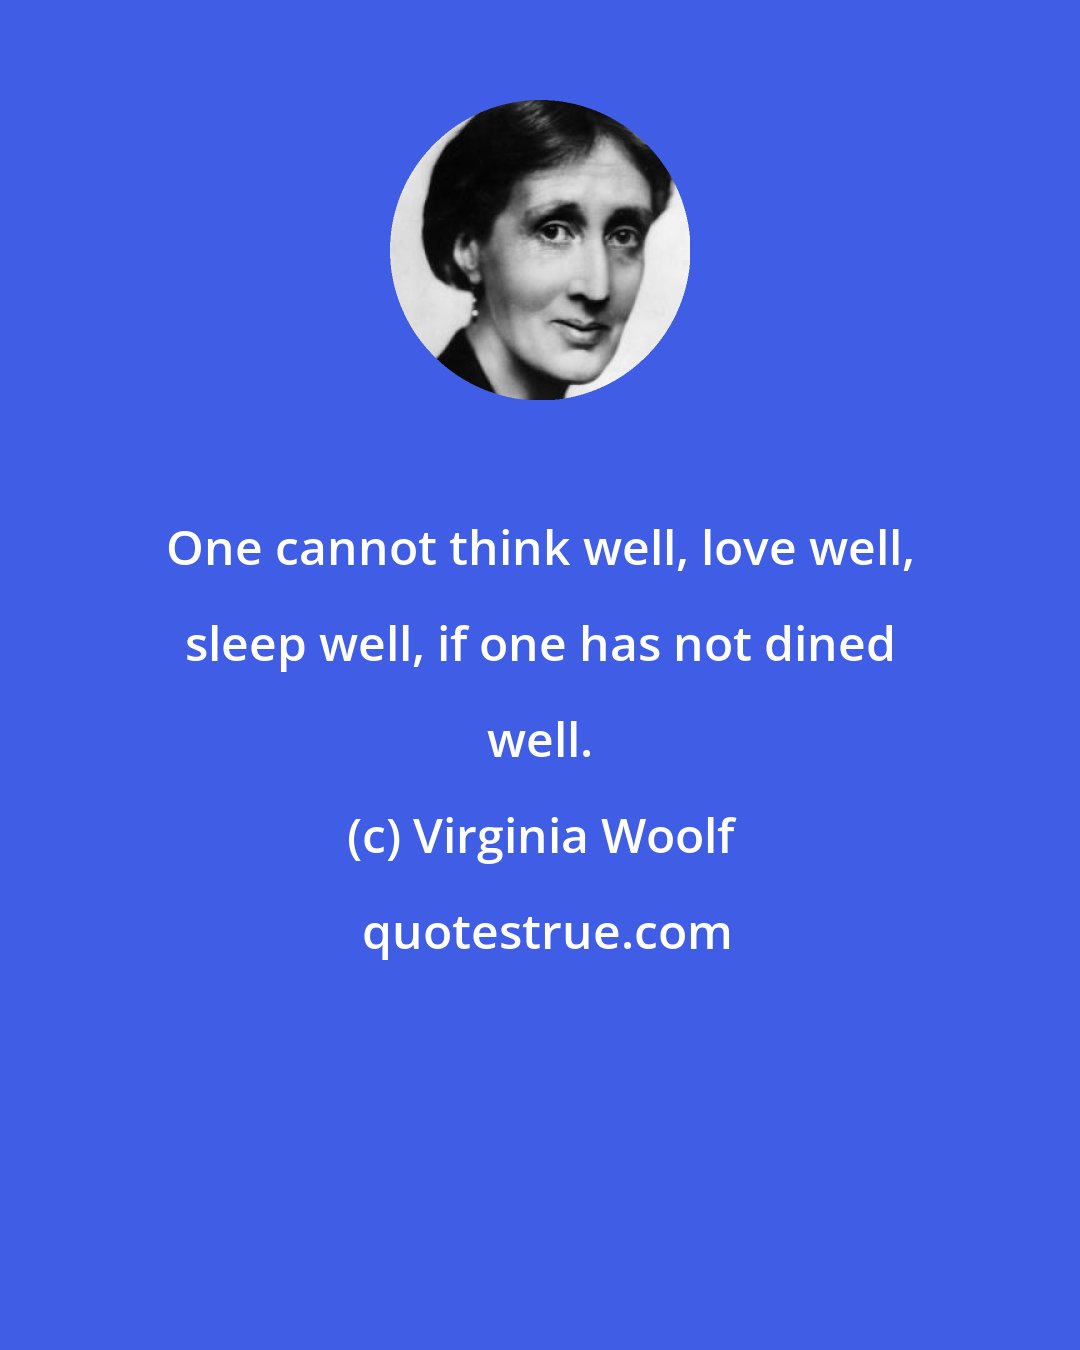 Virginia Woolf: One cannot think well, love well, sleep well, if one has not dined well.